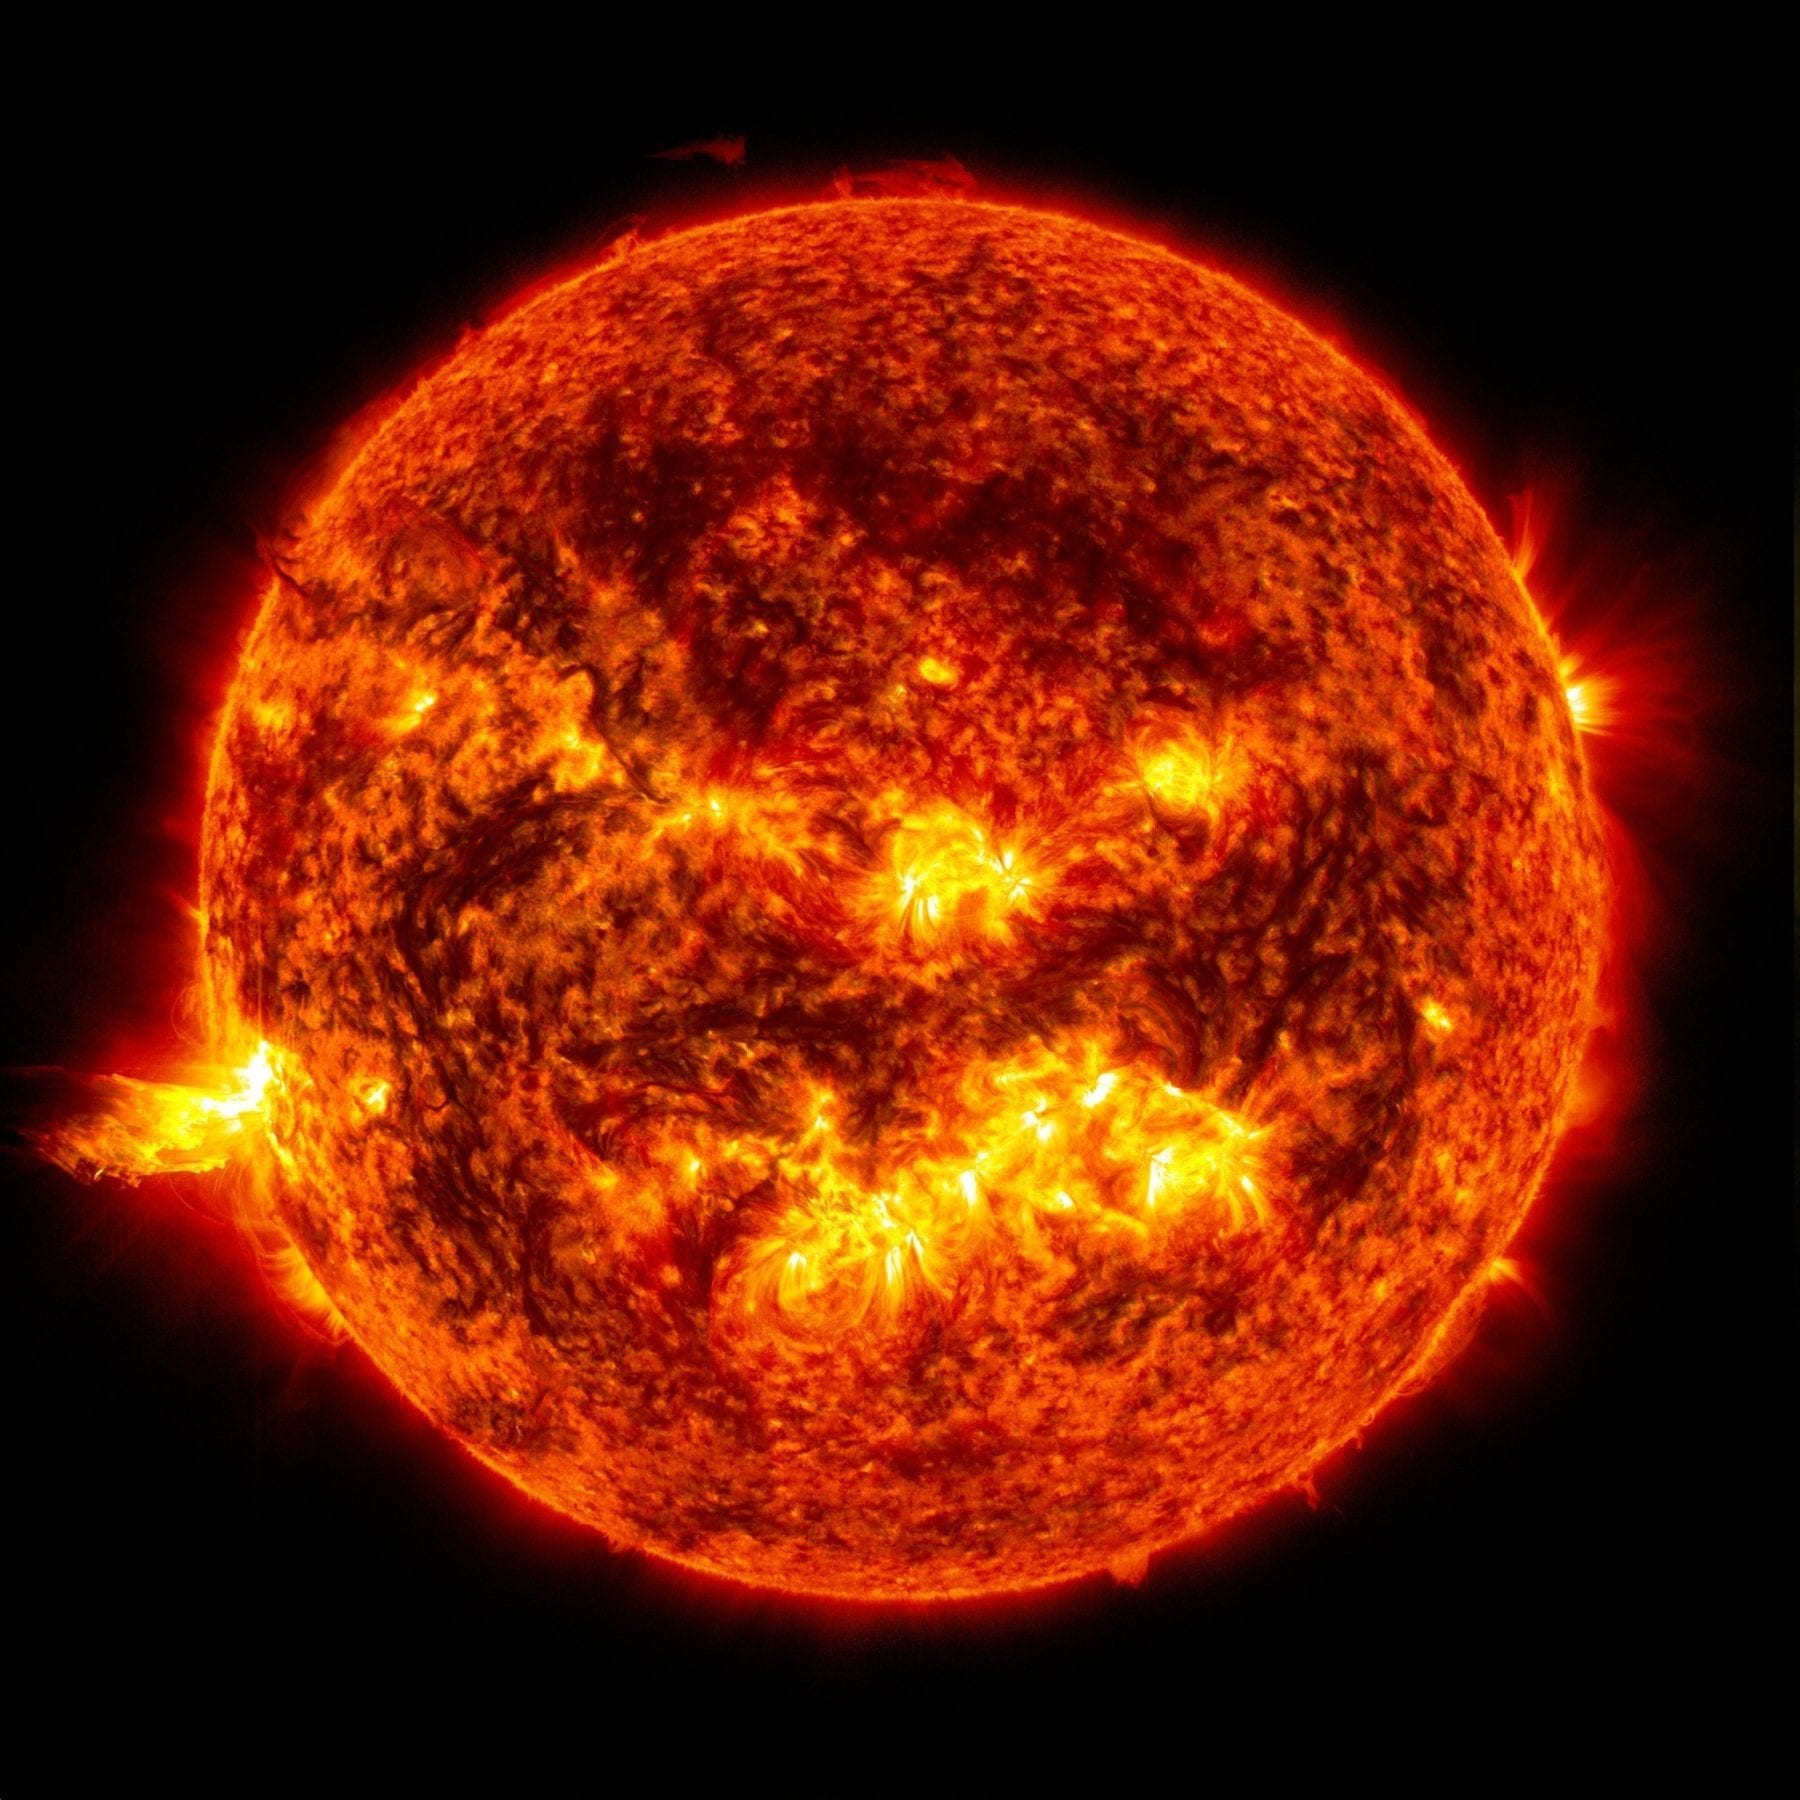 Chinese scientists move step closer to creating ‘artificial sun’ in quest for limitless energy via nuclear fusion